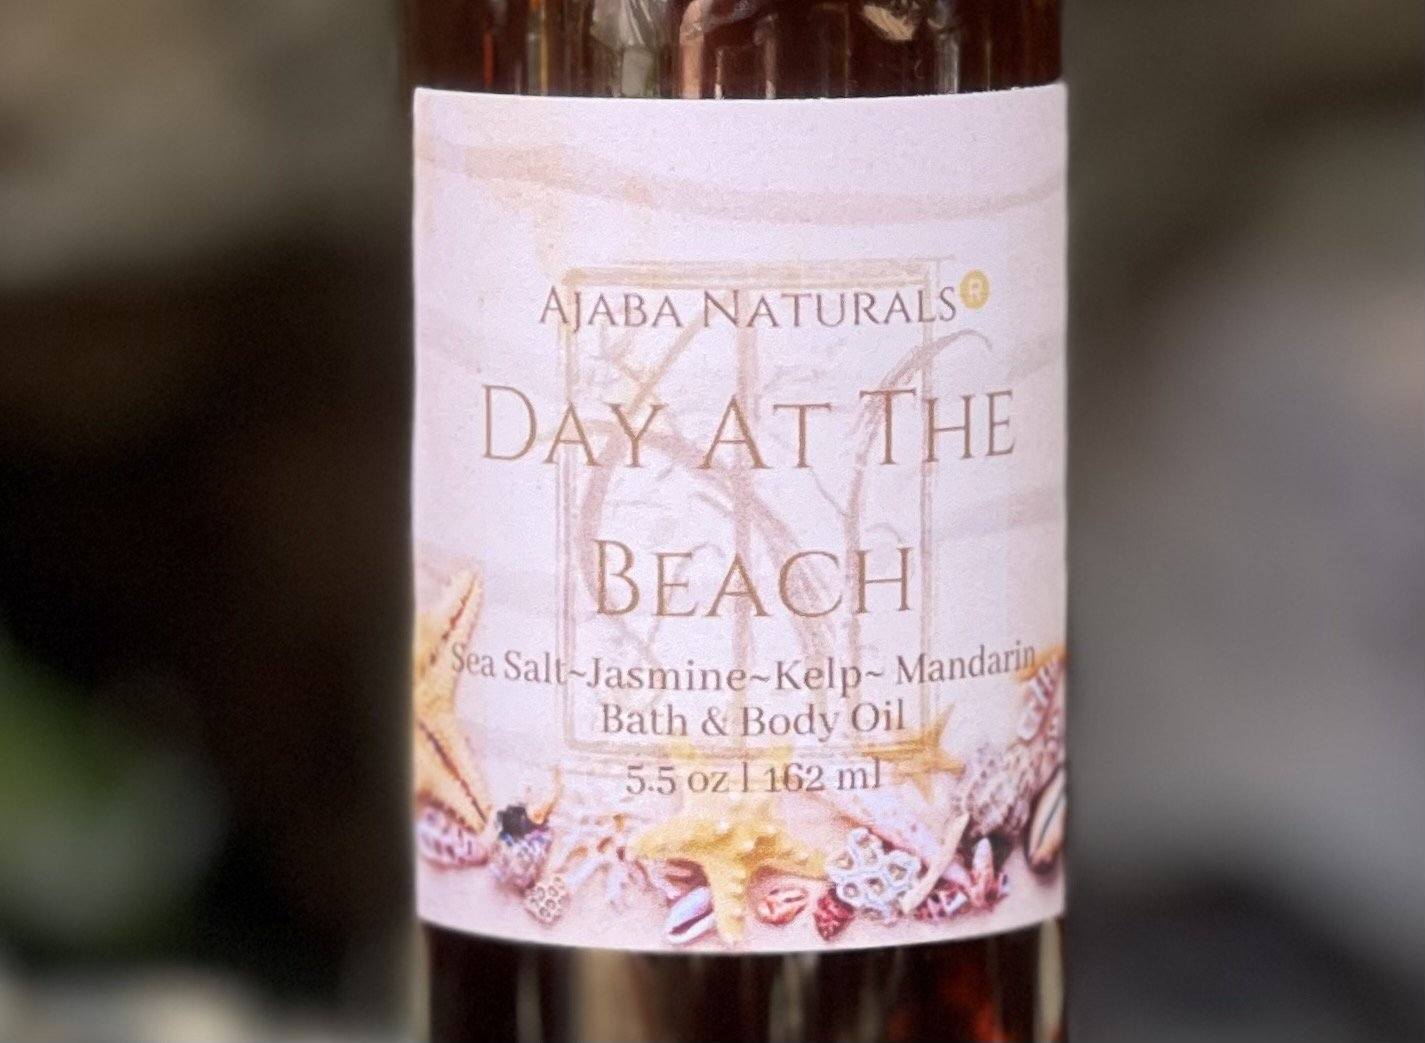 Day at the Beach Bath and Body Oil Body Oil AJABA NATURALS® 